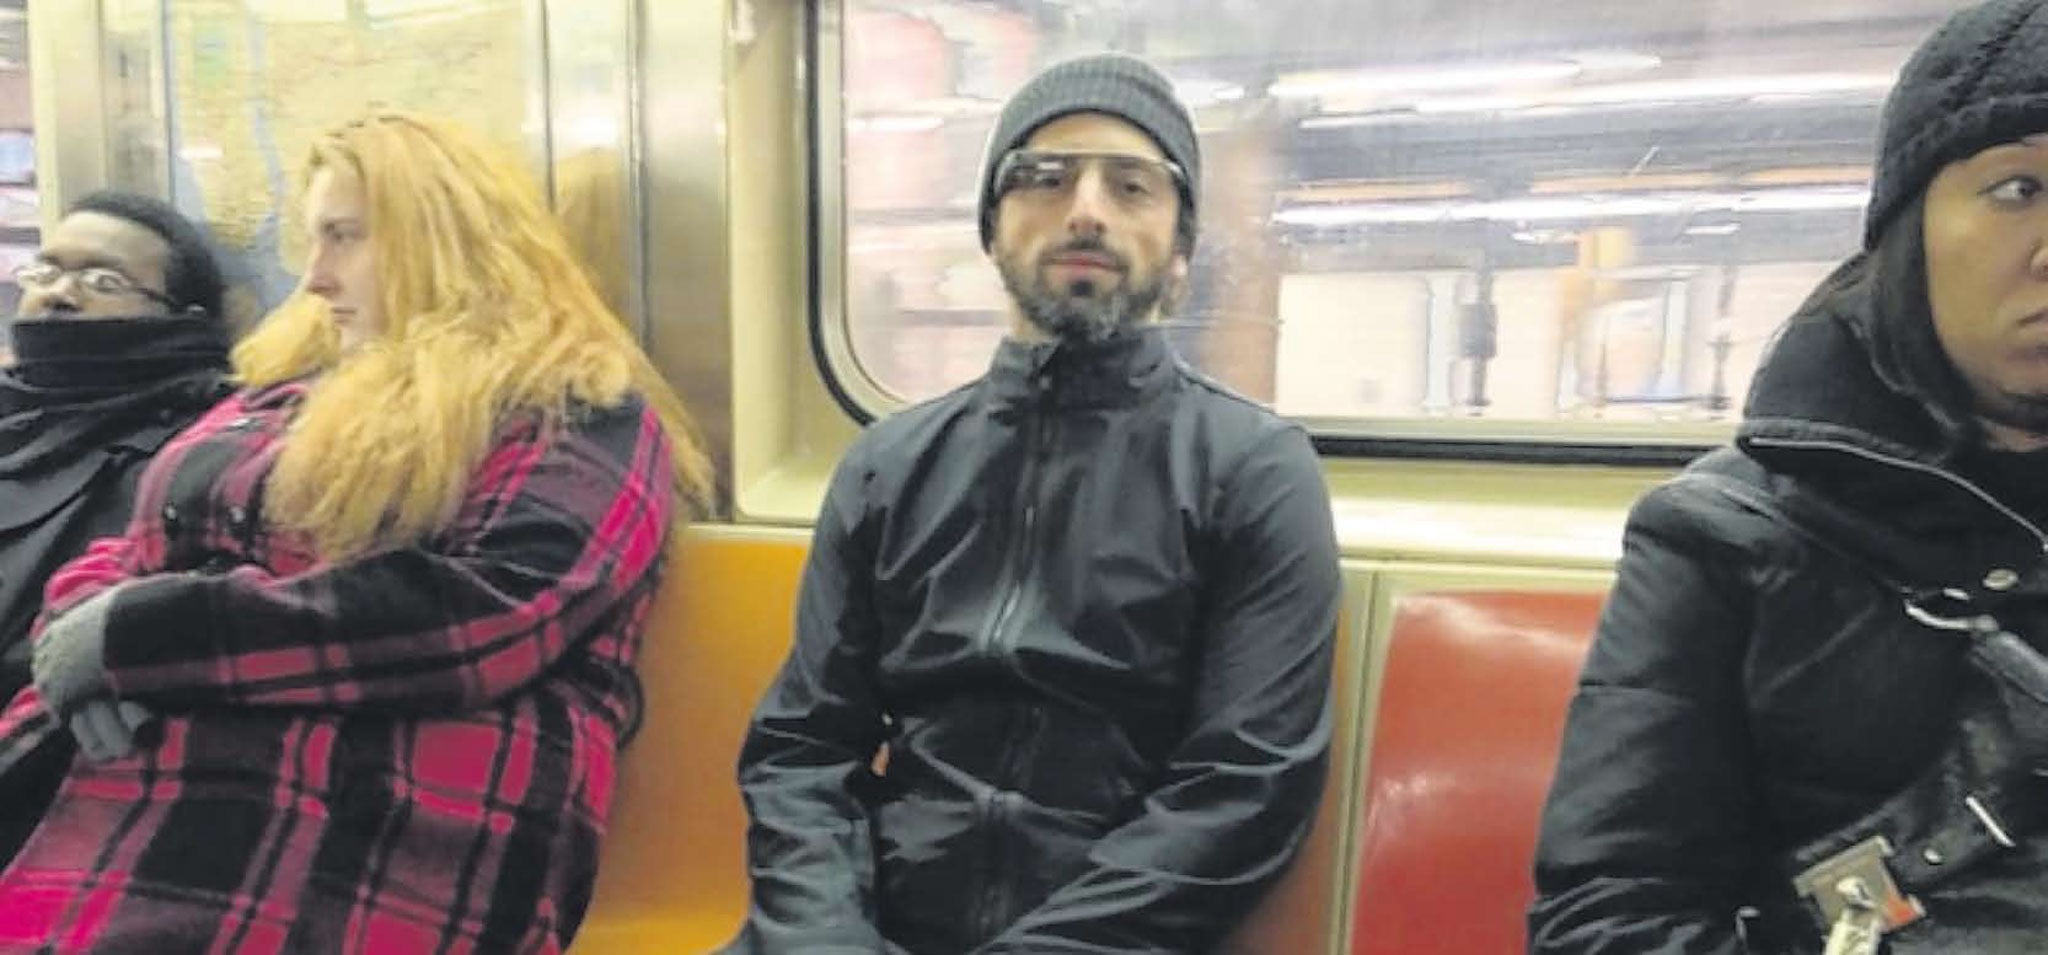 Sergey Brin spotted on New York subway wearing 'Google goggles'